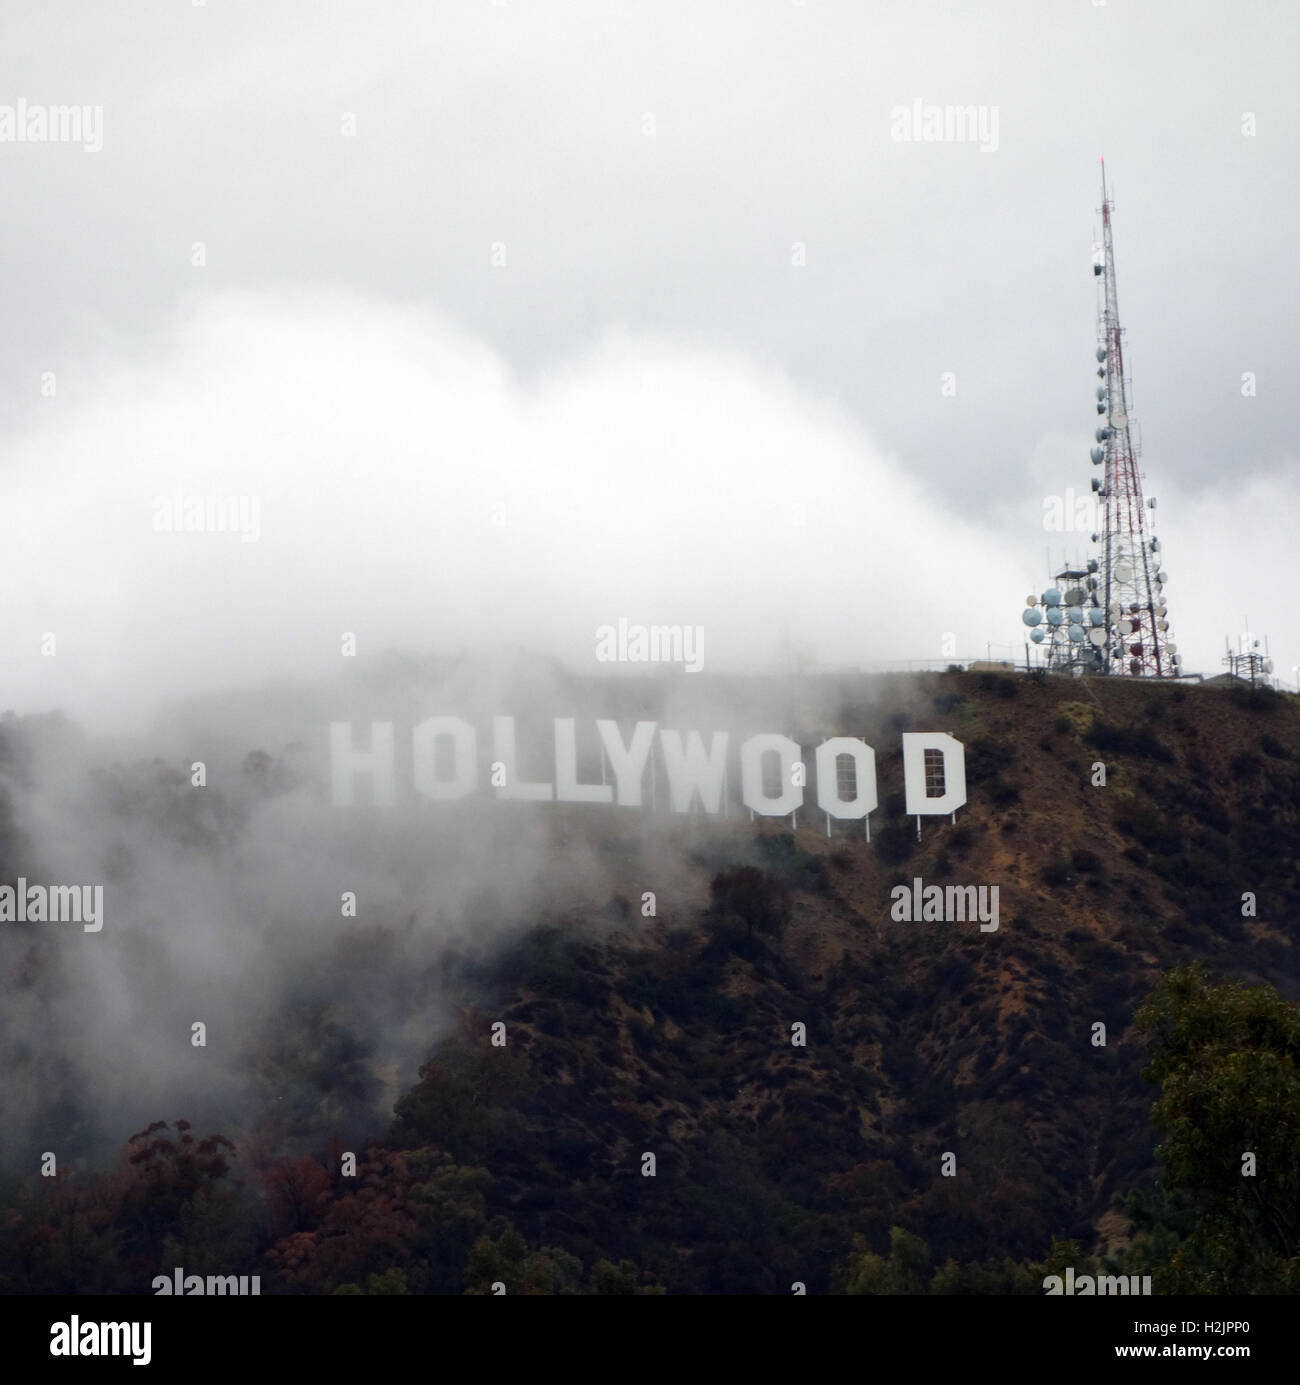 Hollywood Sign obscured by fog Stock Photo